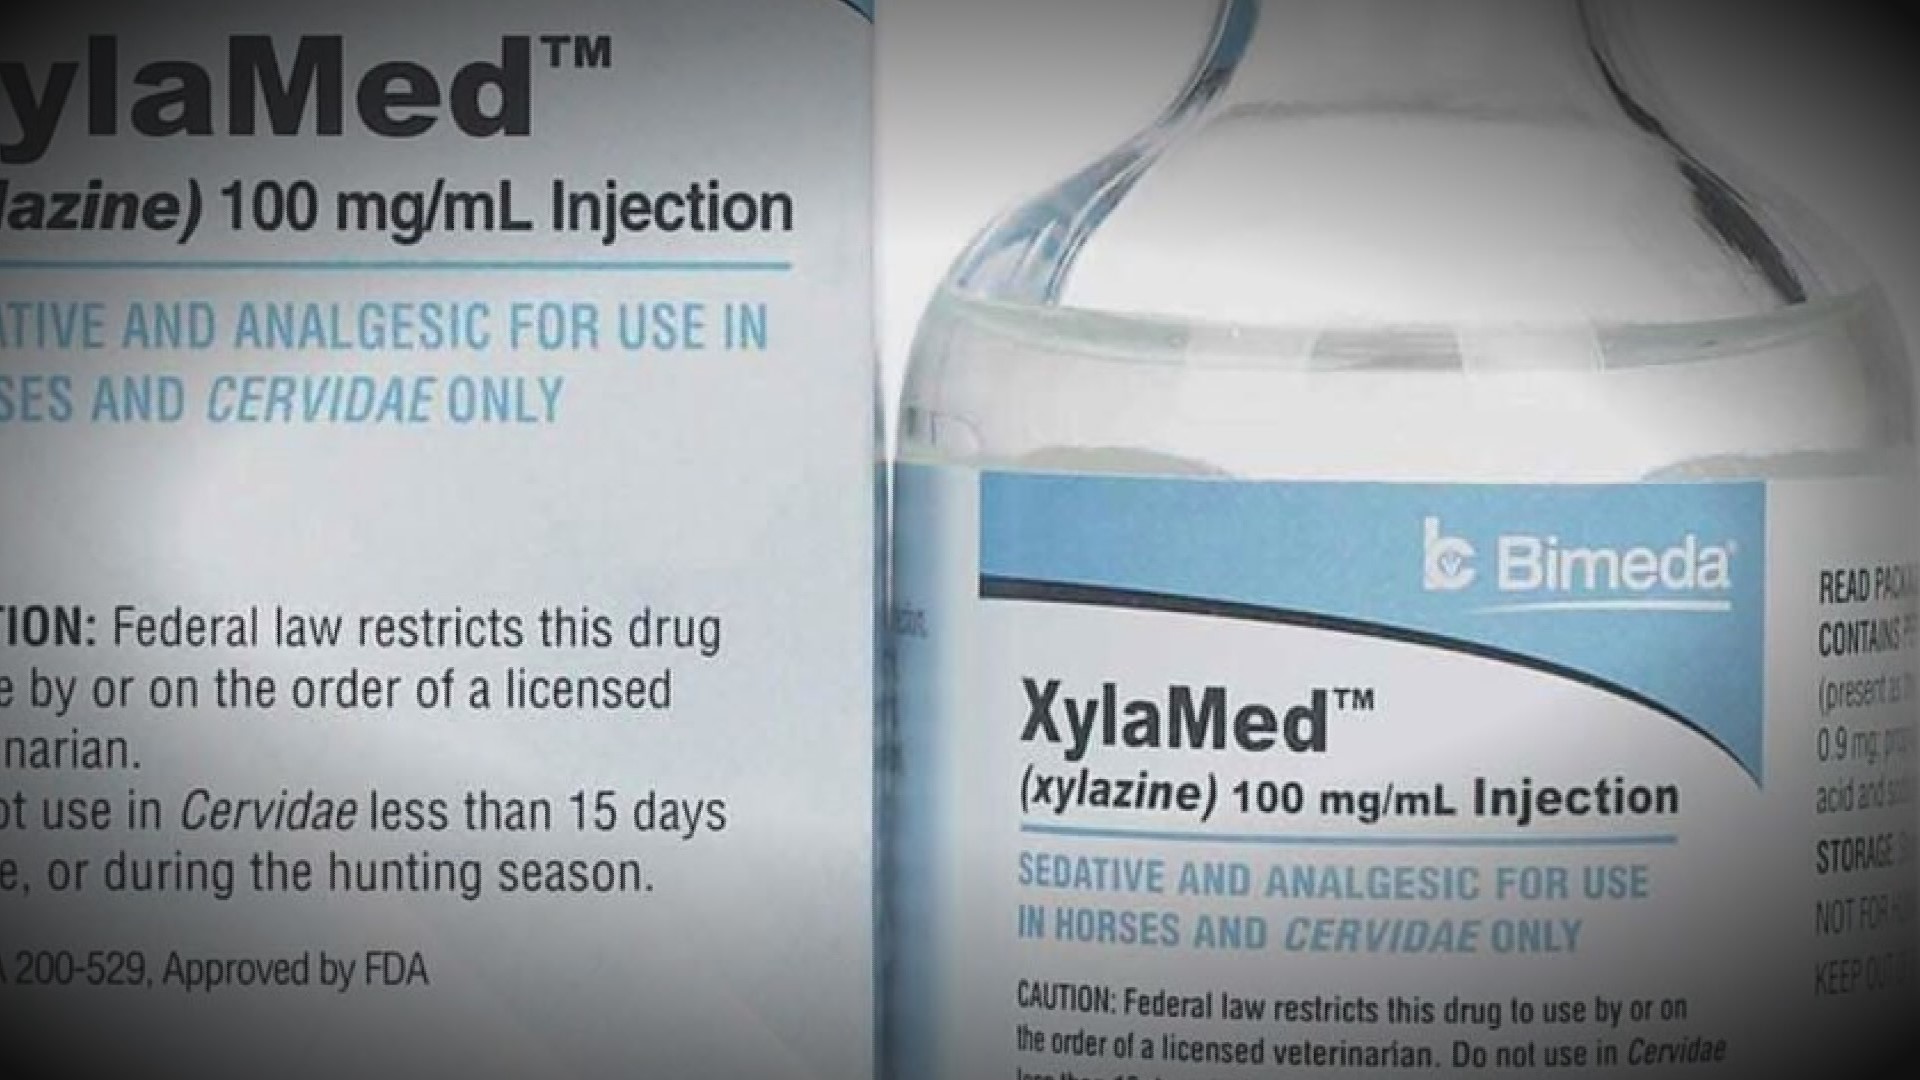 At least 4 deaths in Texas have been reported to be related to xylazine (tranq).